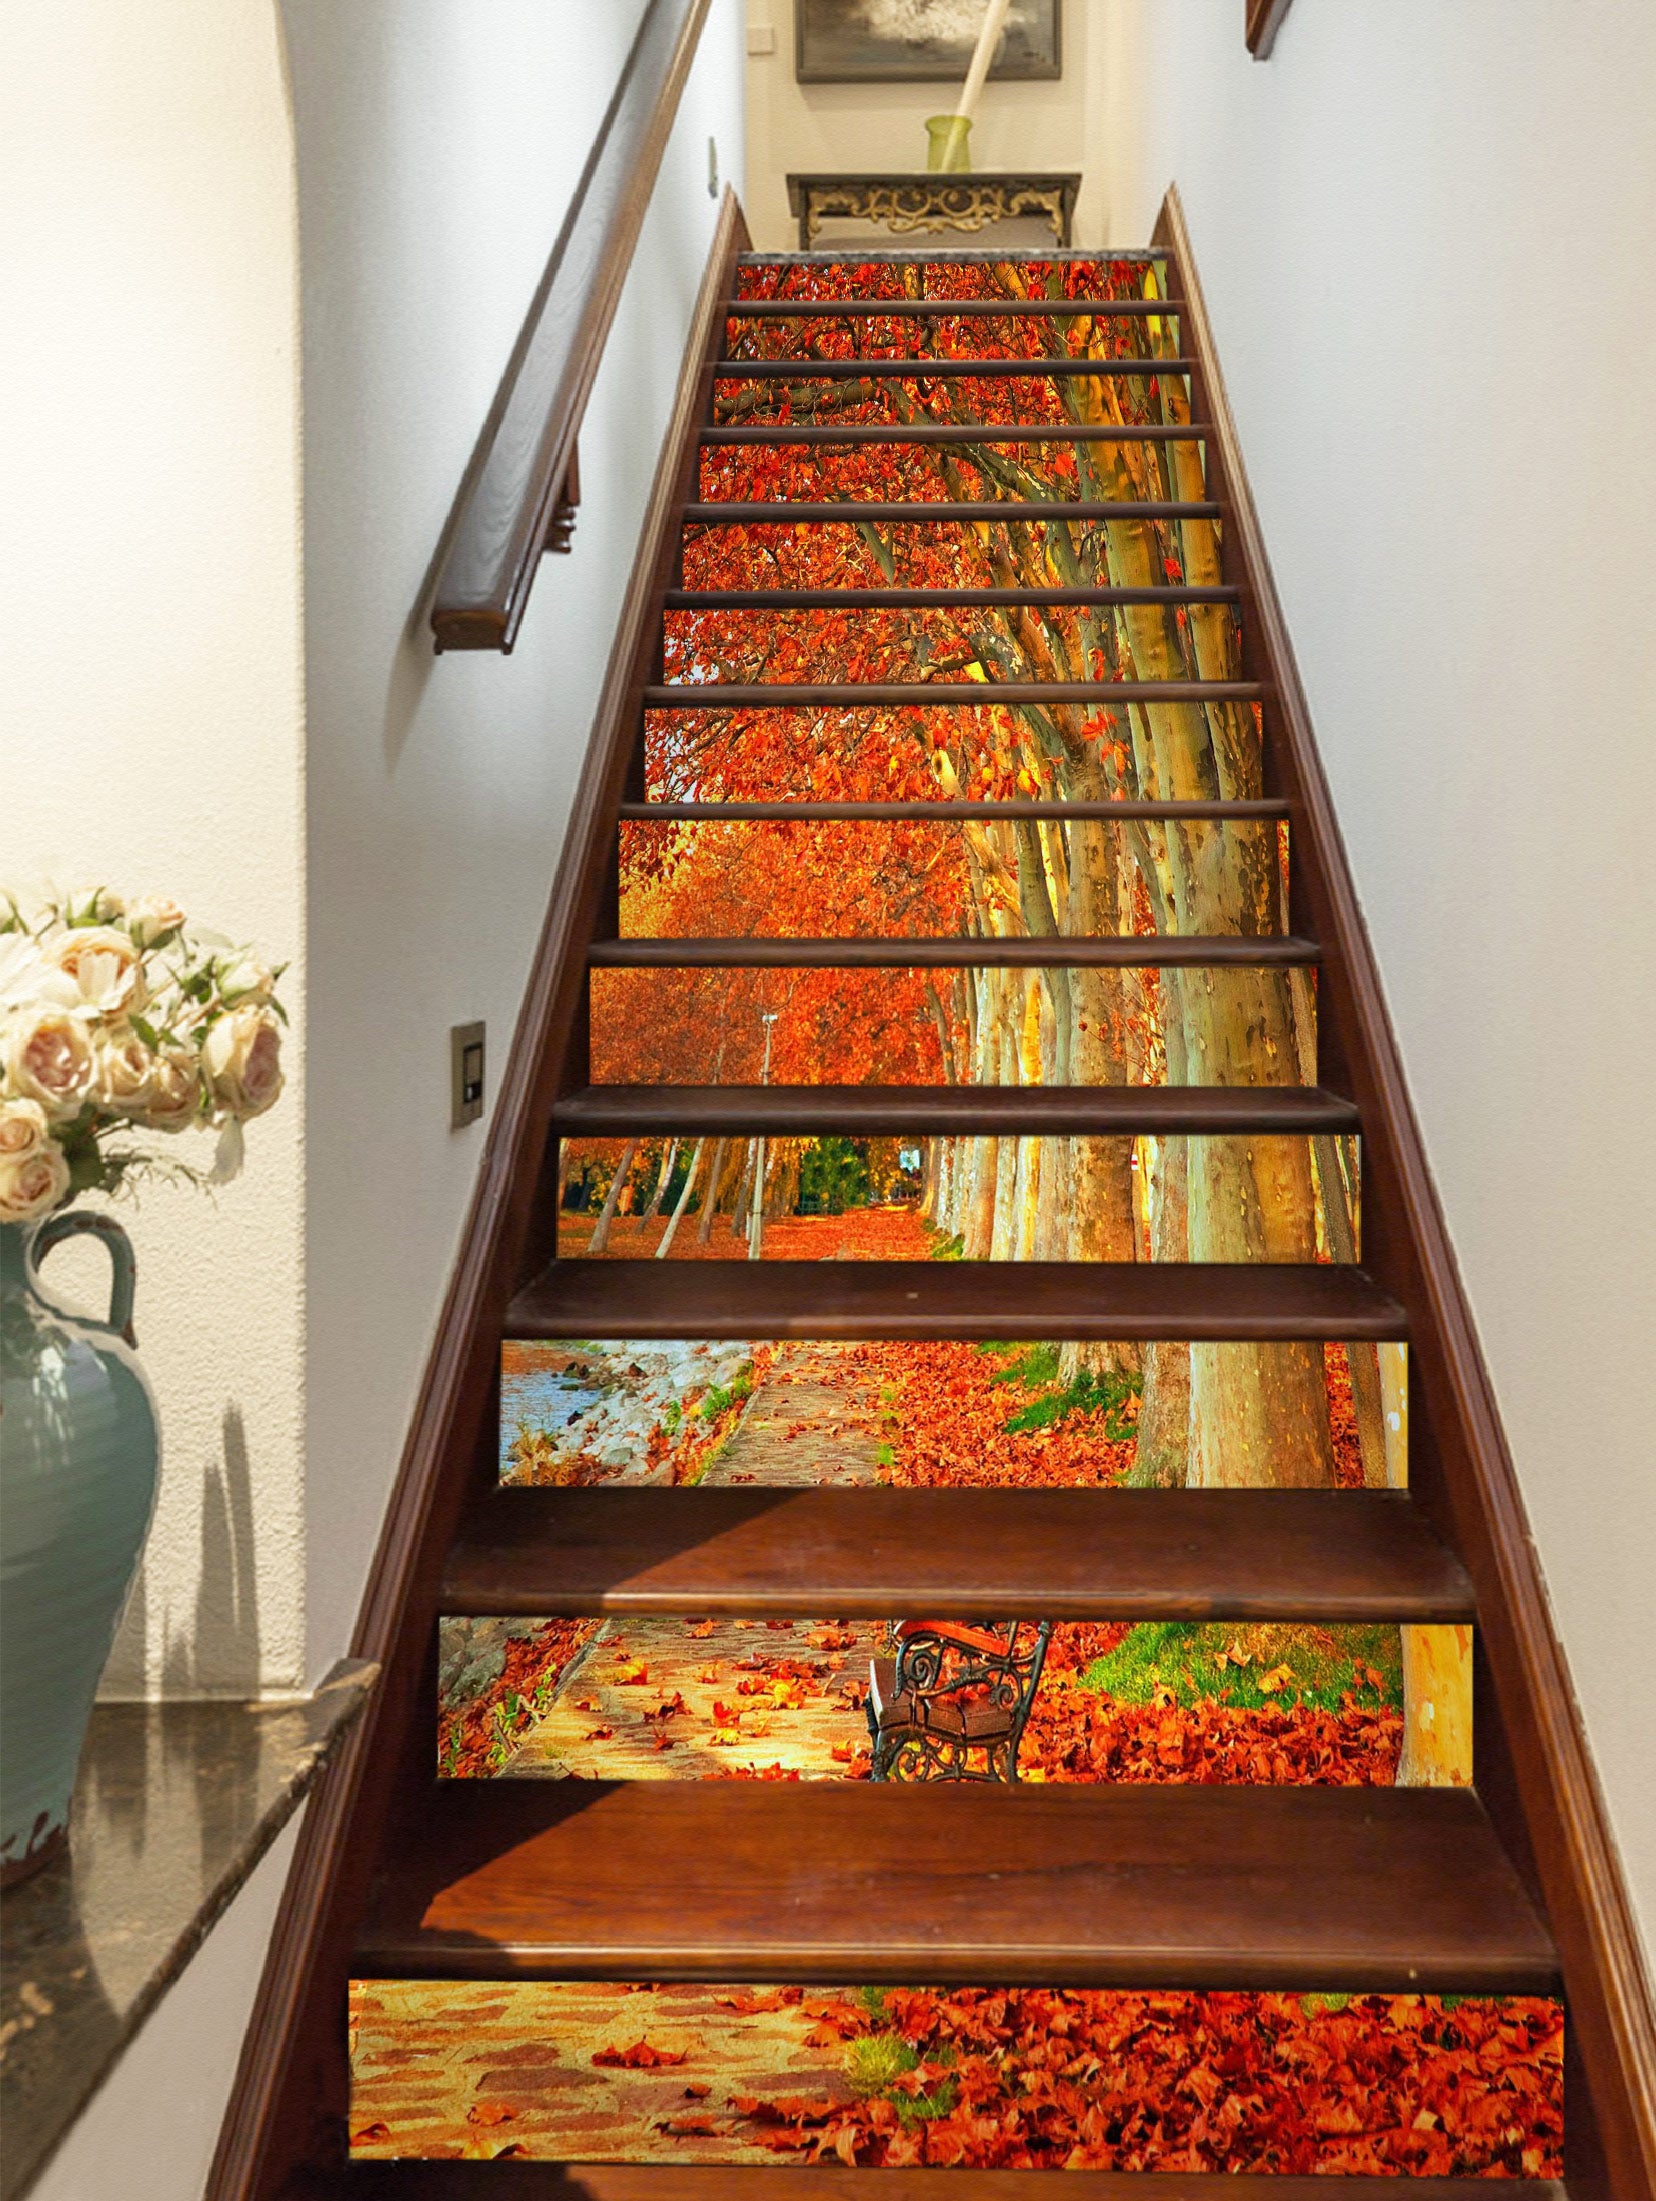 3D Golden Autumn of Memory 417 Stair Risers